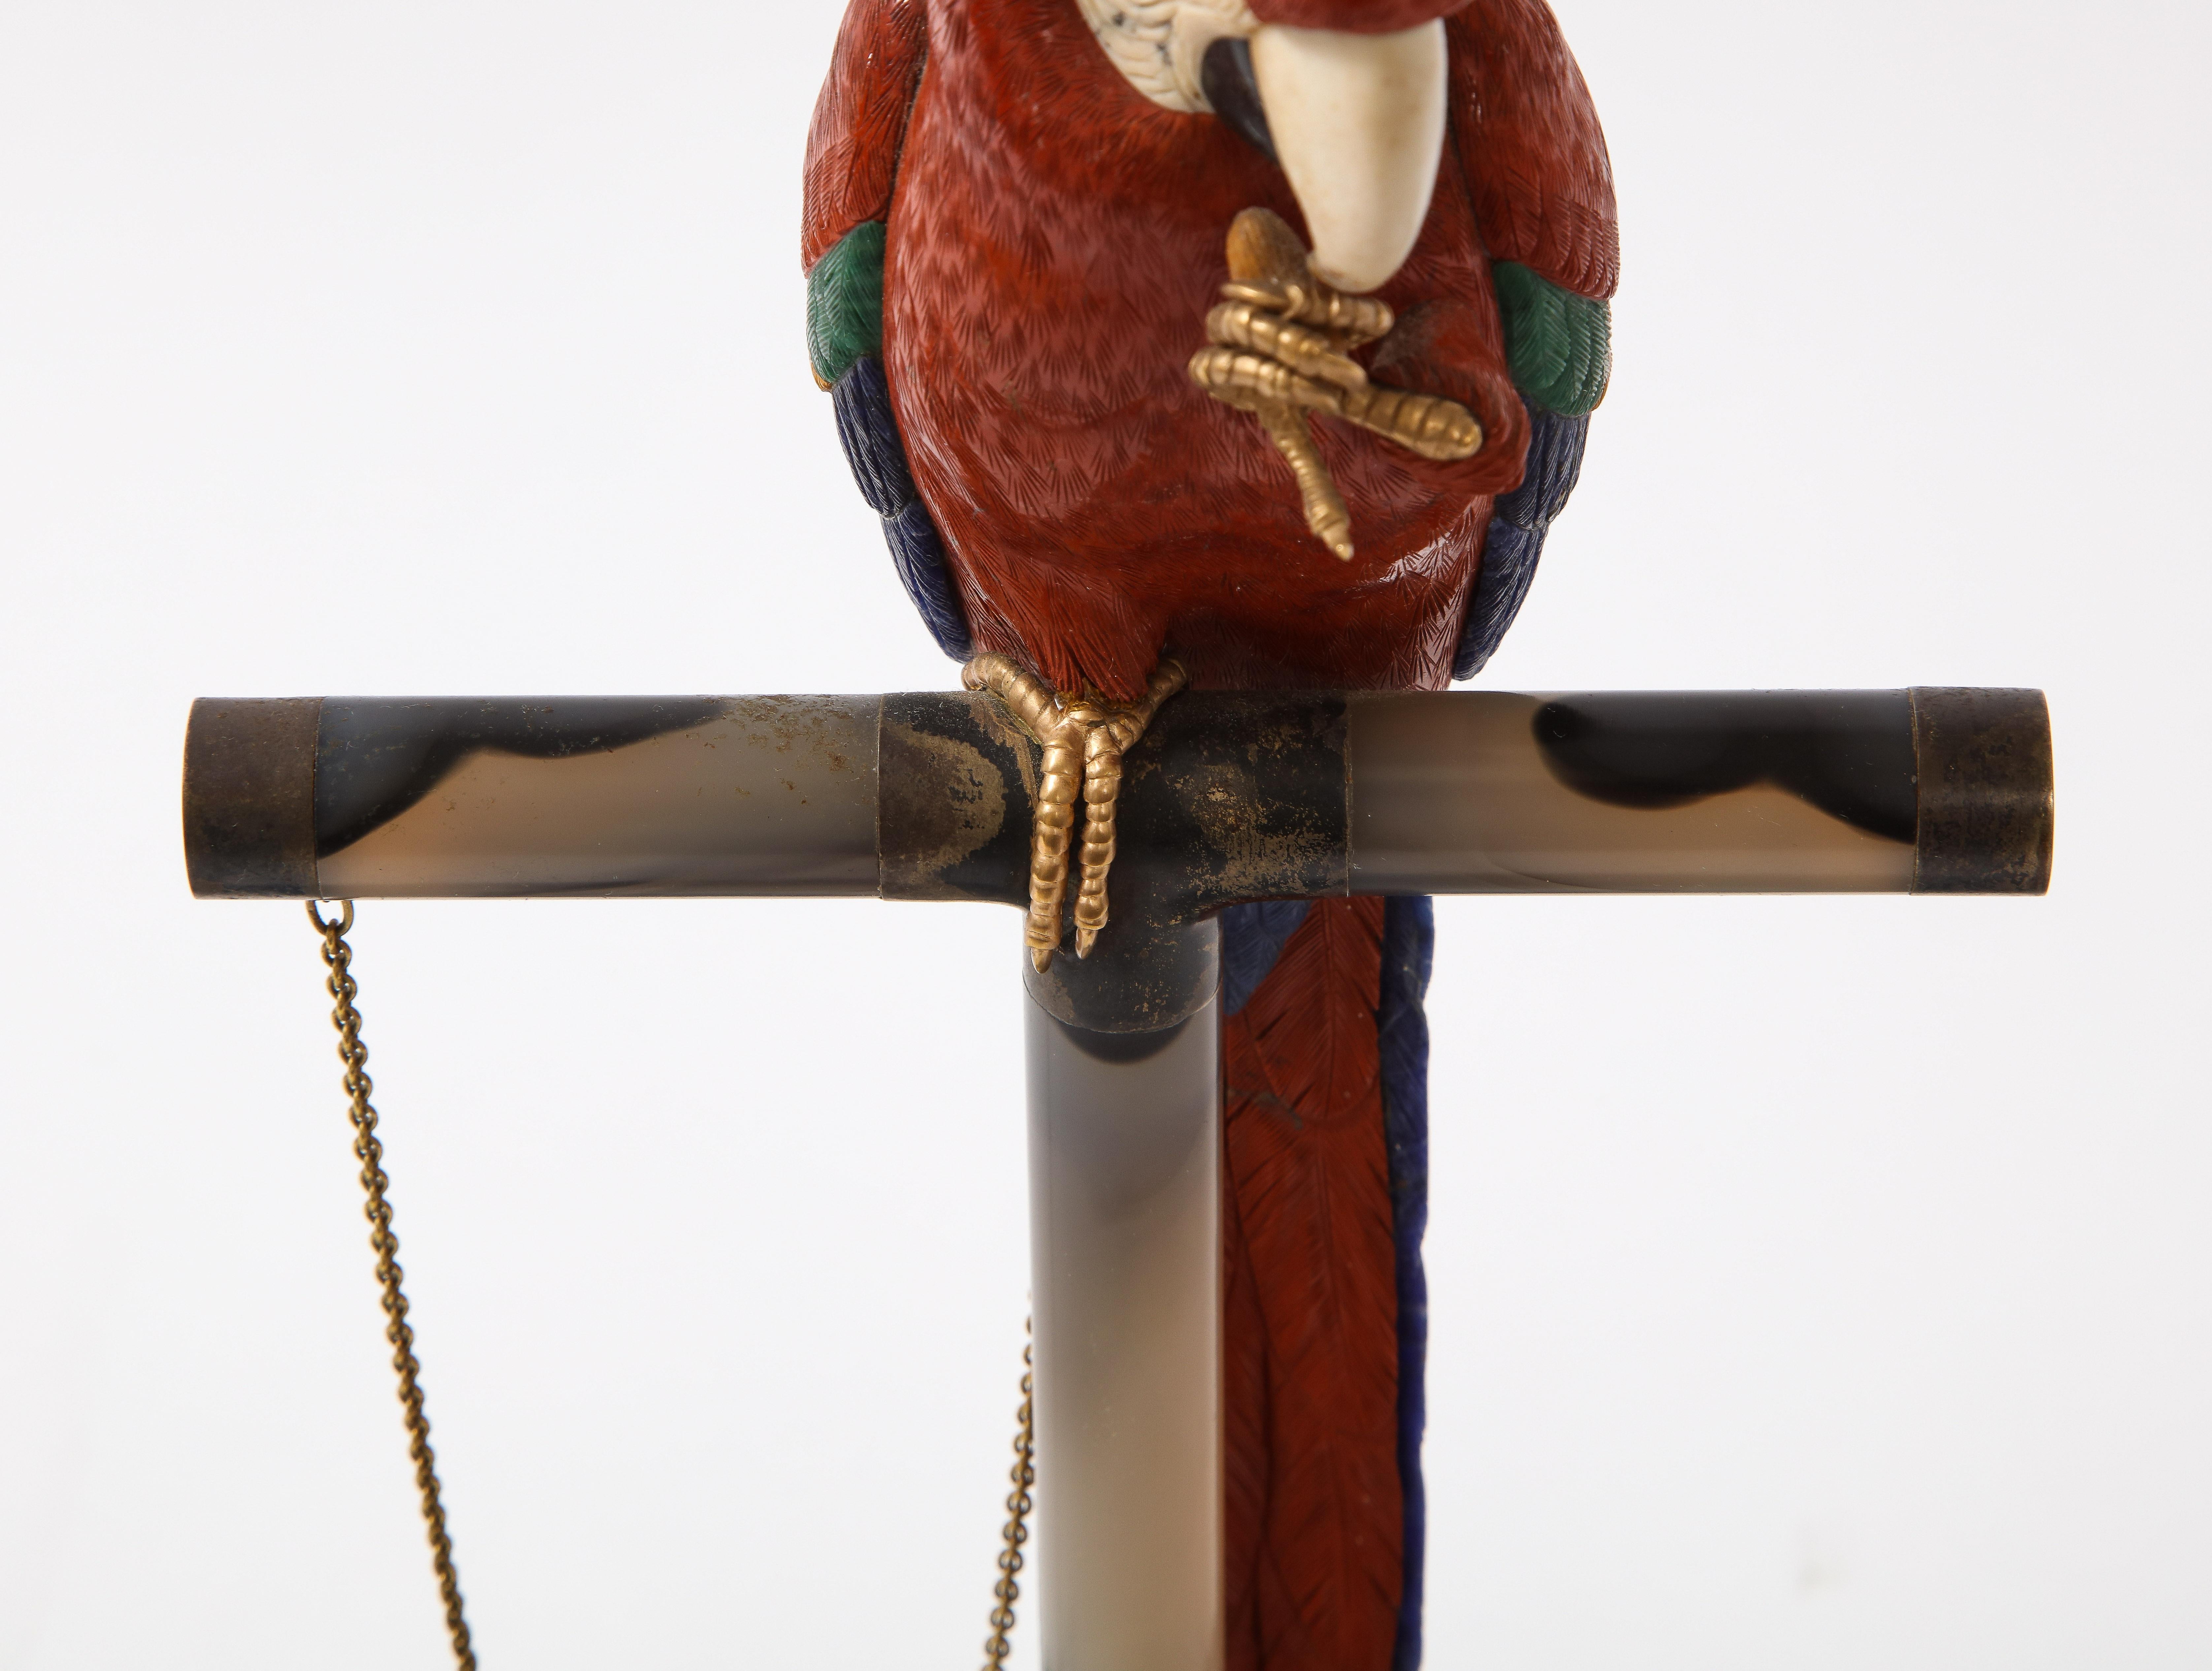 Semi Precious Stone & Metal Model of a Scarlet Macaw Parrot, P. Müller, Swiss 3